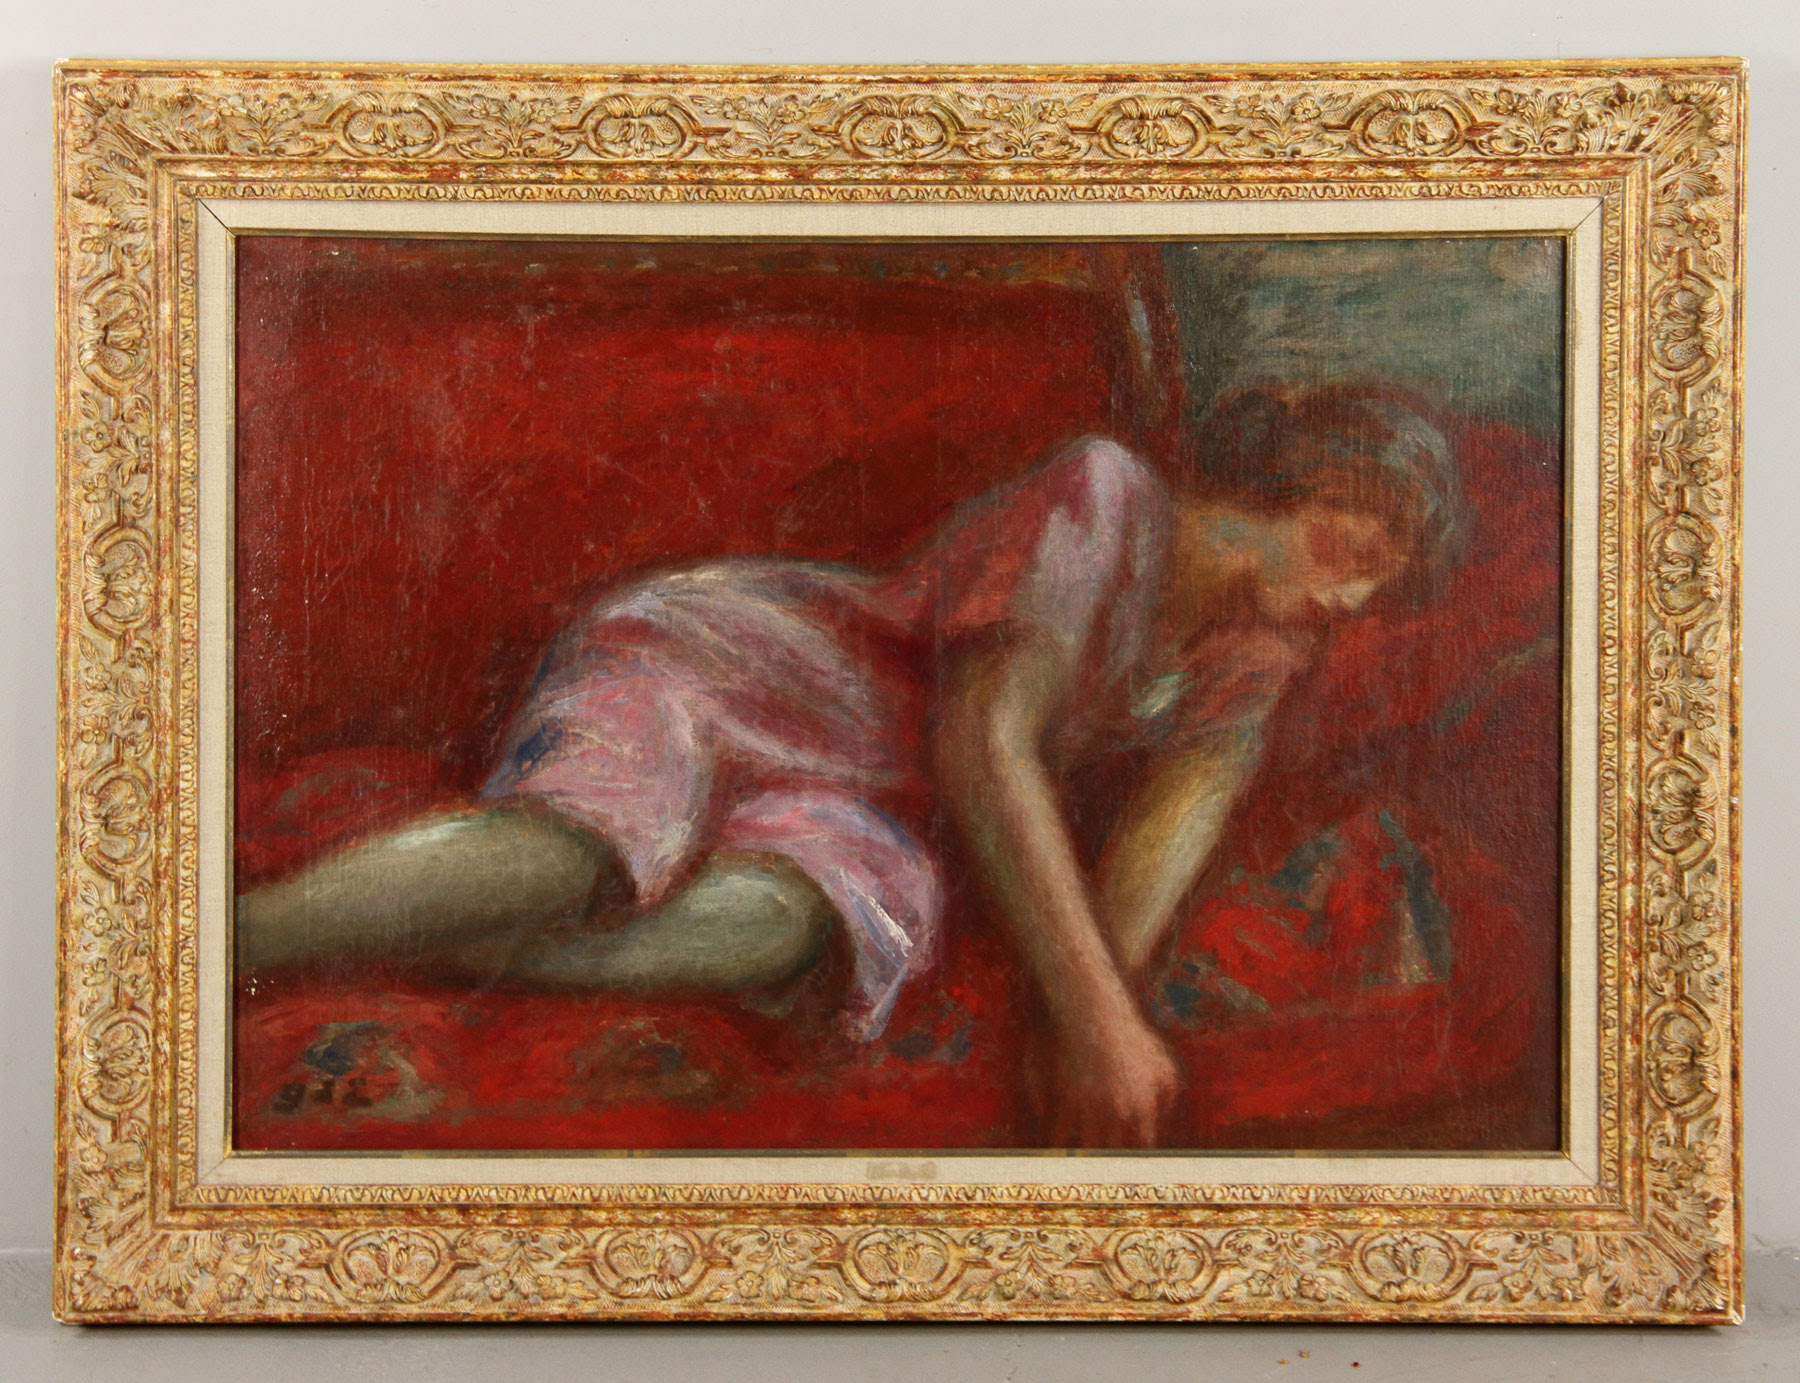 Georges d'Espagnat (French 1870-1950) ‘Woman on Red Sofa,’ oil on canvas (est. $8,000-$12,000). Kaminski Auctions image